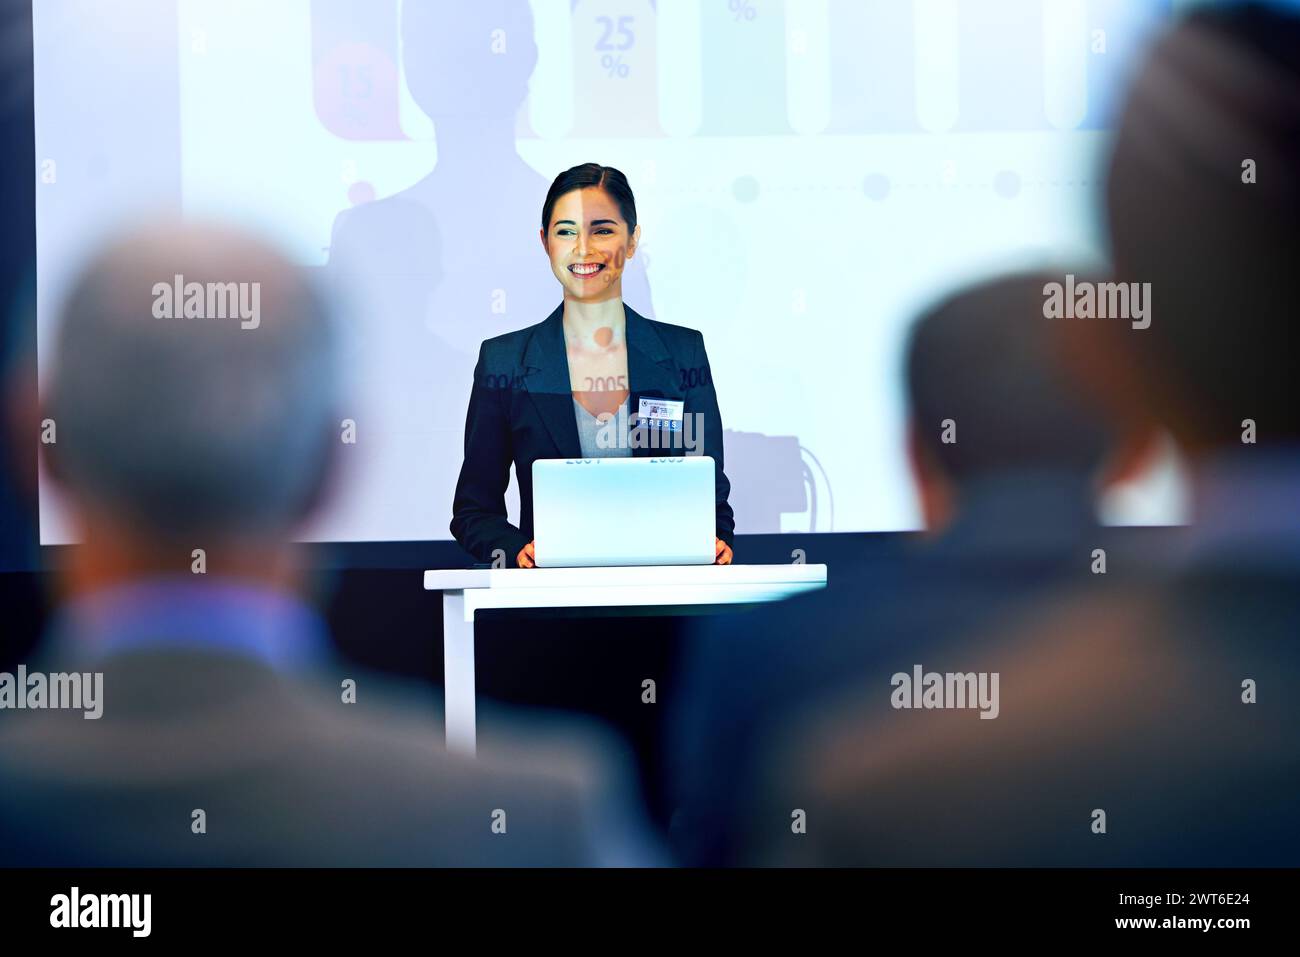 Business woman, smile and presentation with projector screen, conference or workshop with laptop for slideshow. Corporate training, seminar and Stock Photo